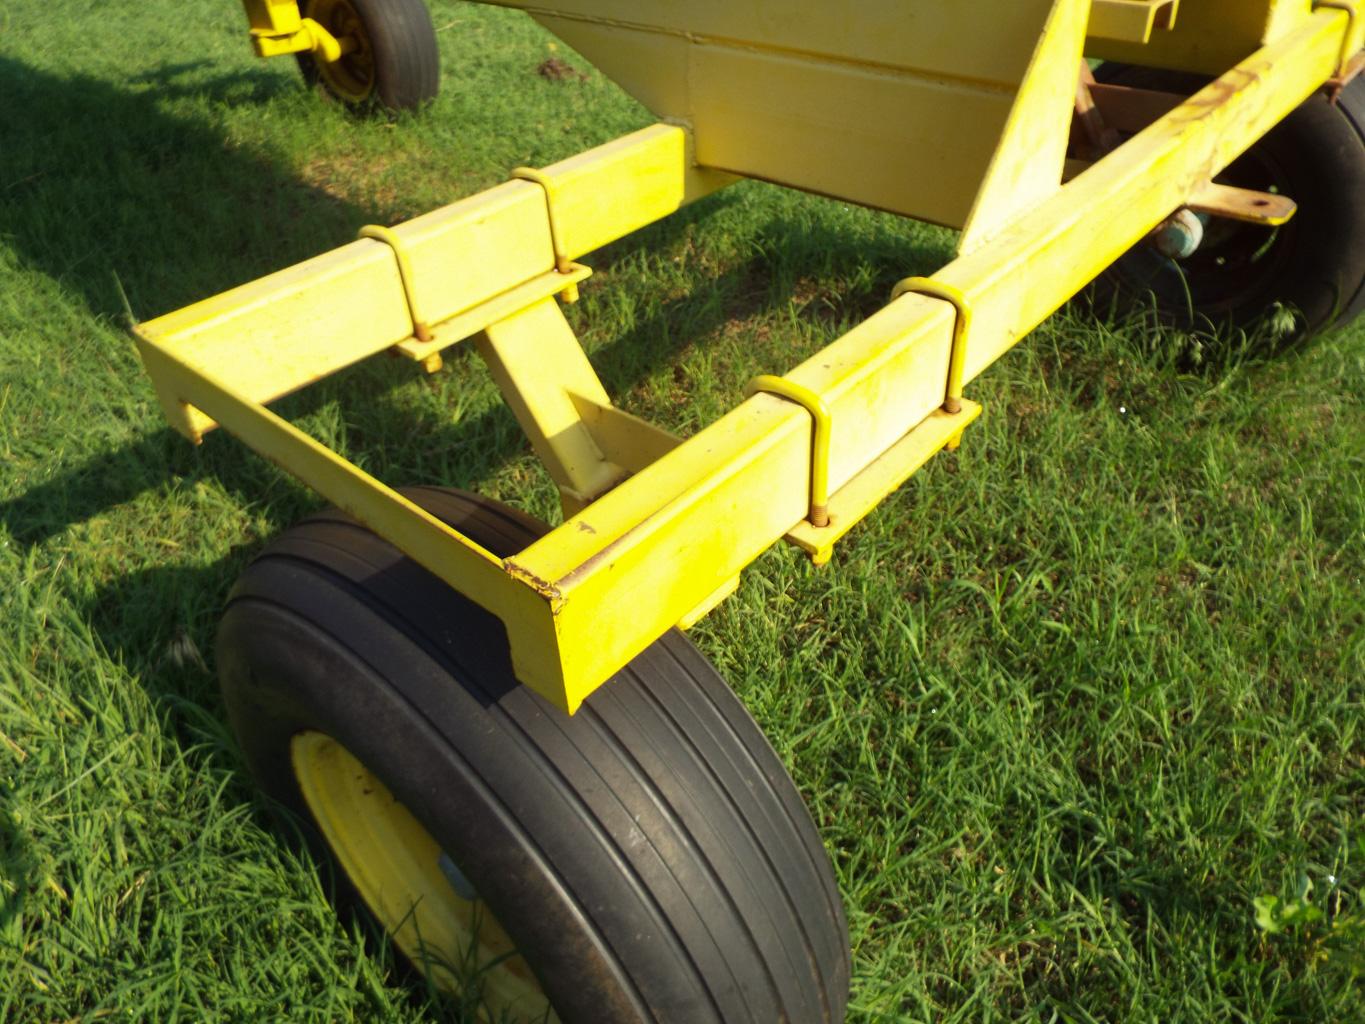 Anhydrous Trailer, with adjustable axles.